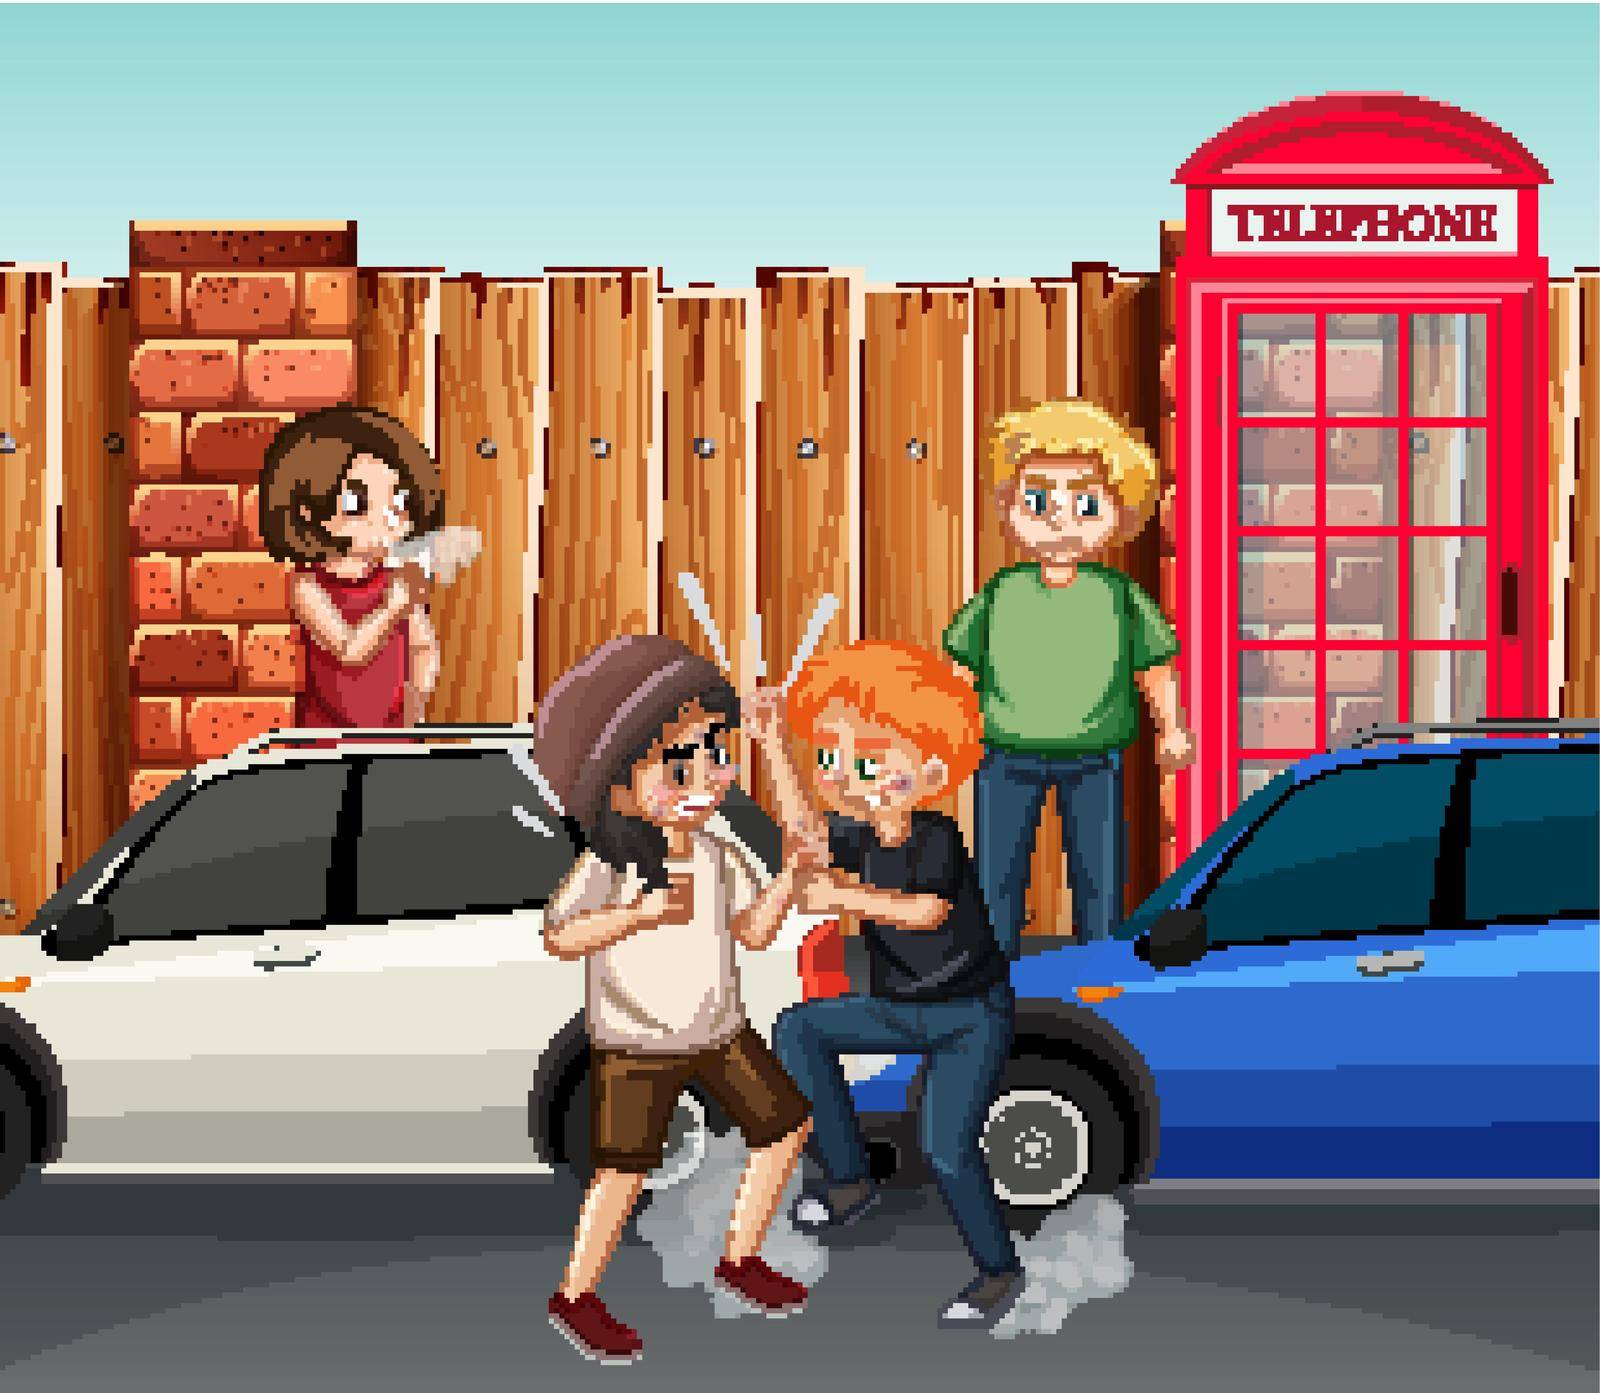 Domestic violence scene with people fighting on the street illustration